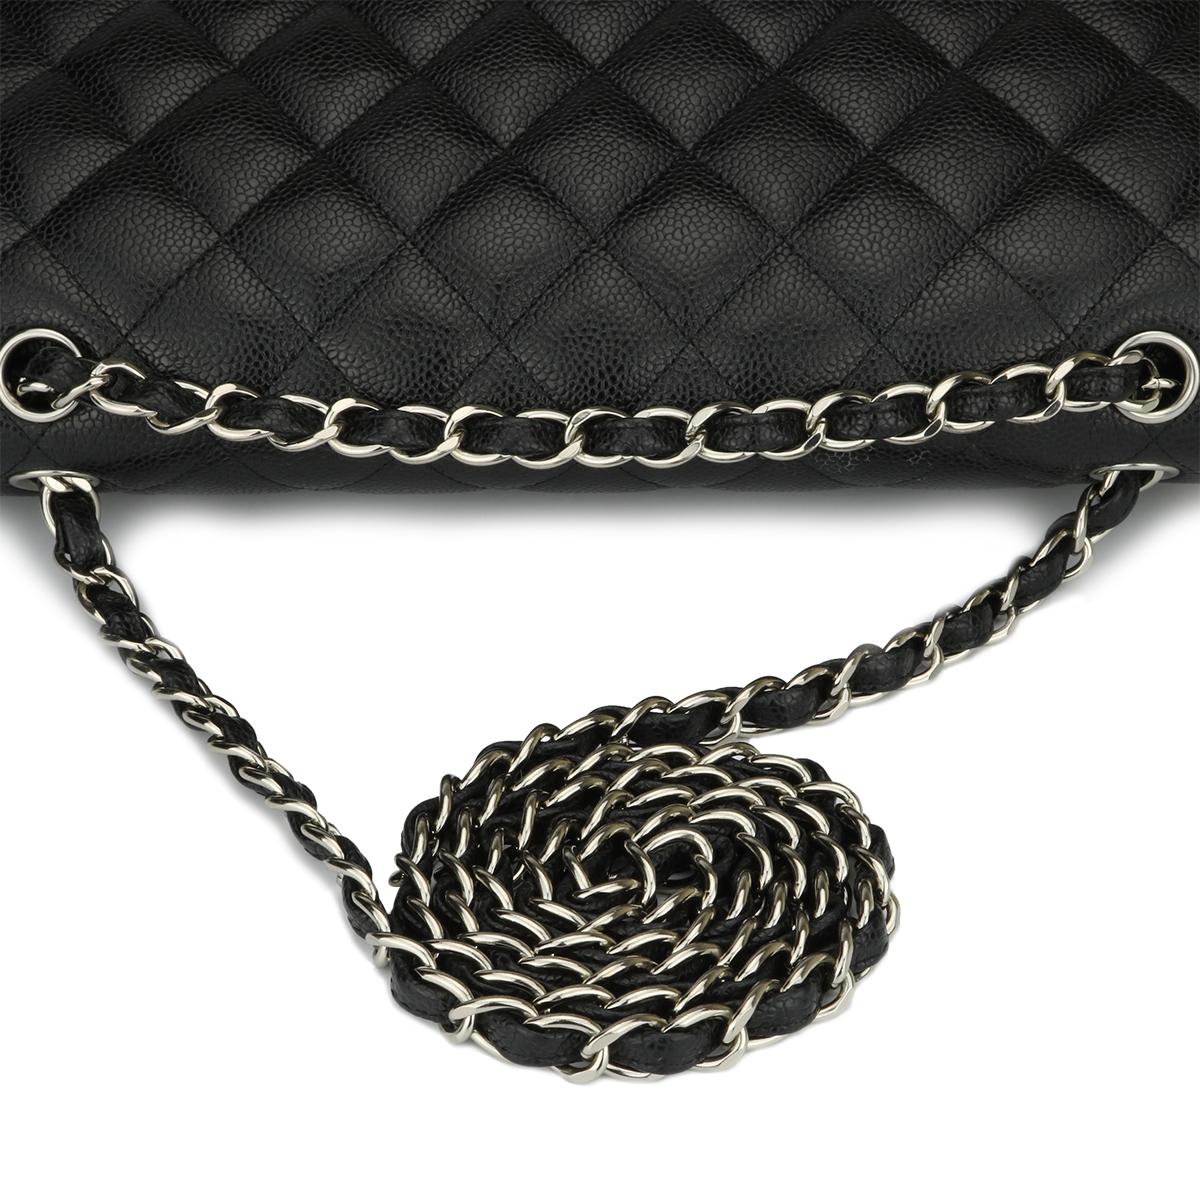 Chanel Classic Jumbo Black Caviar Double Flap Bag with Silver Hardware, 2013 8